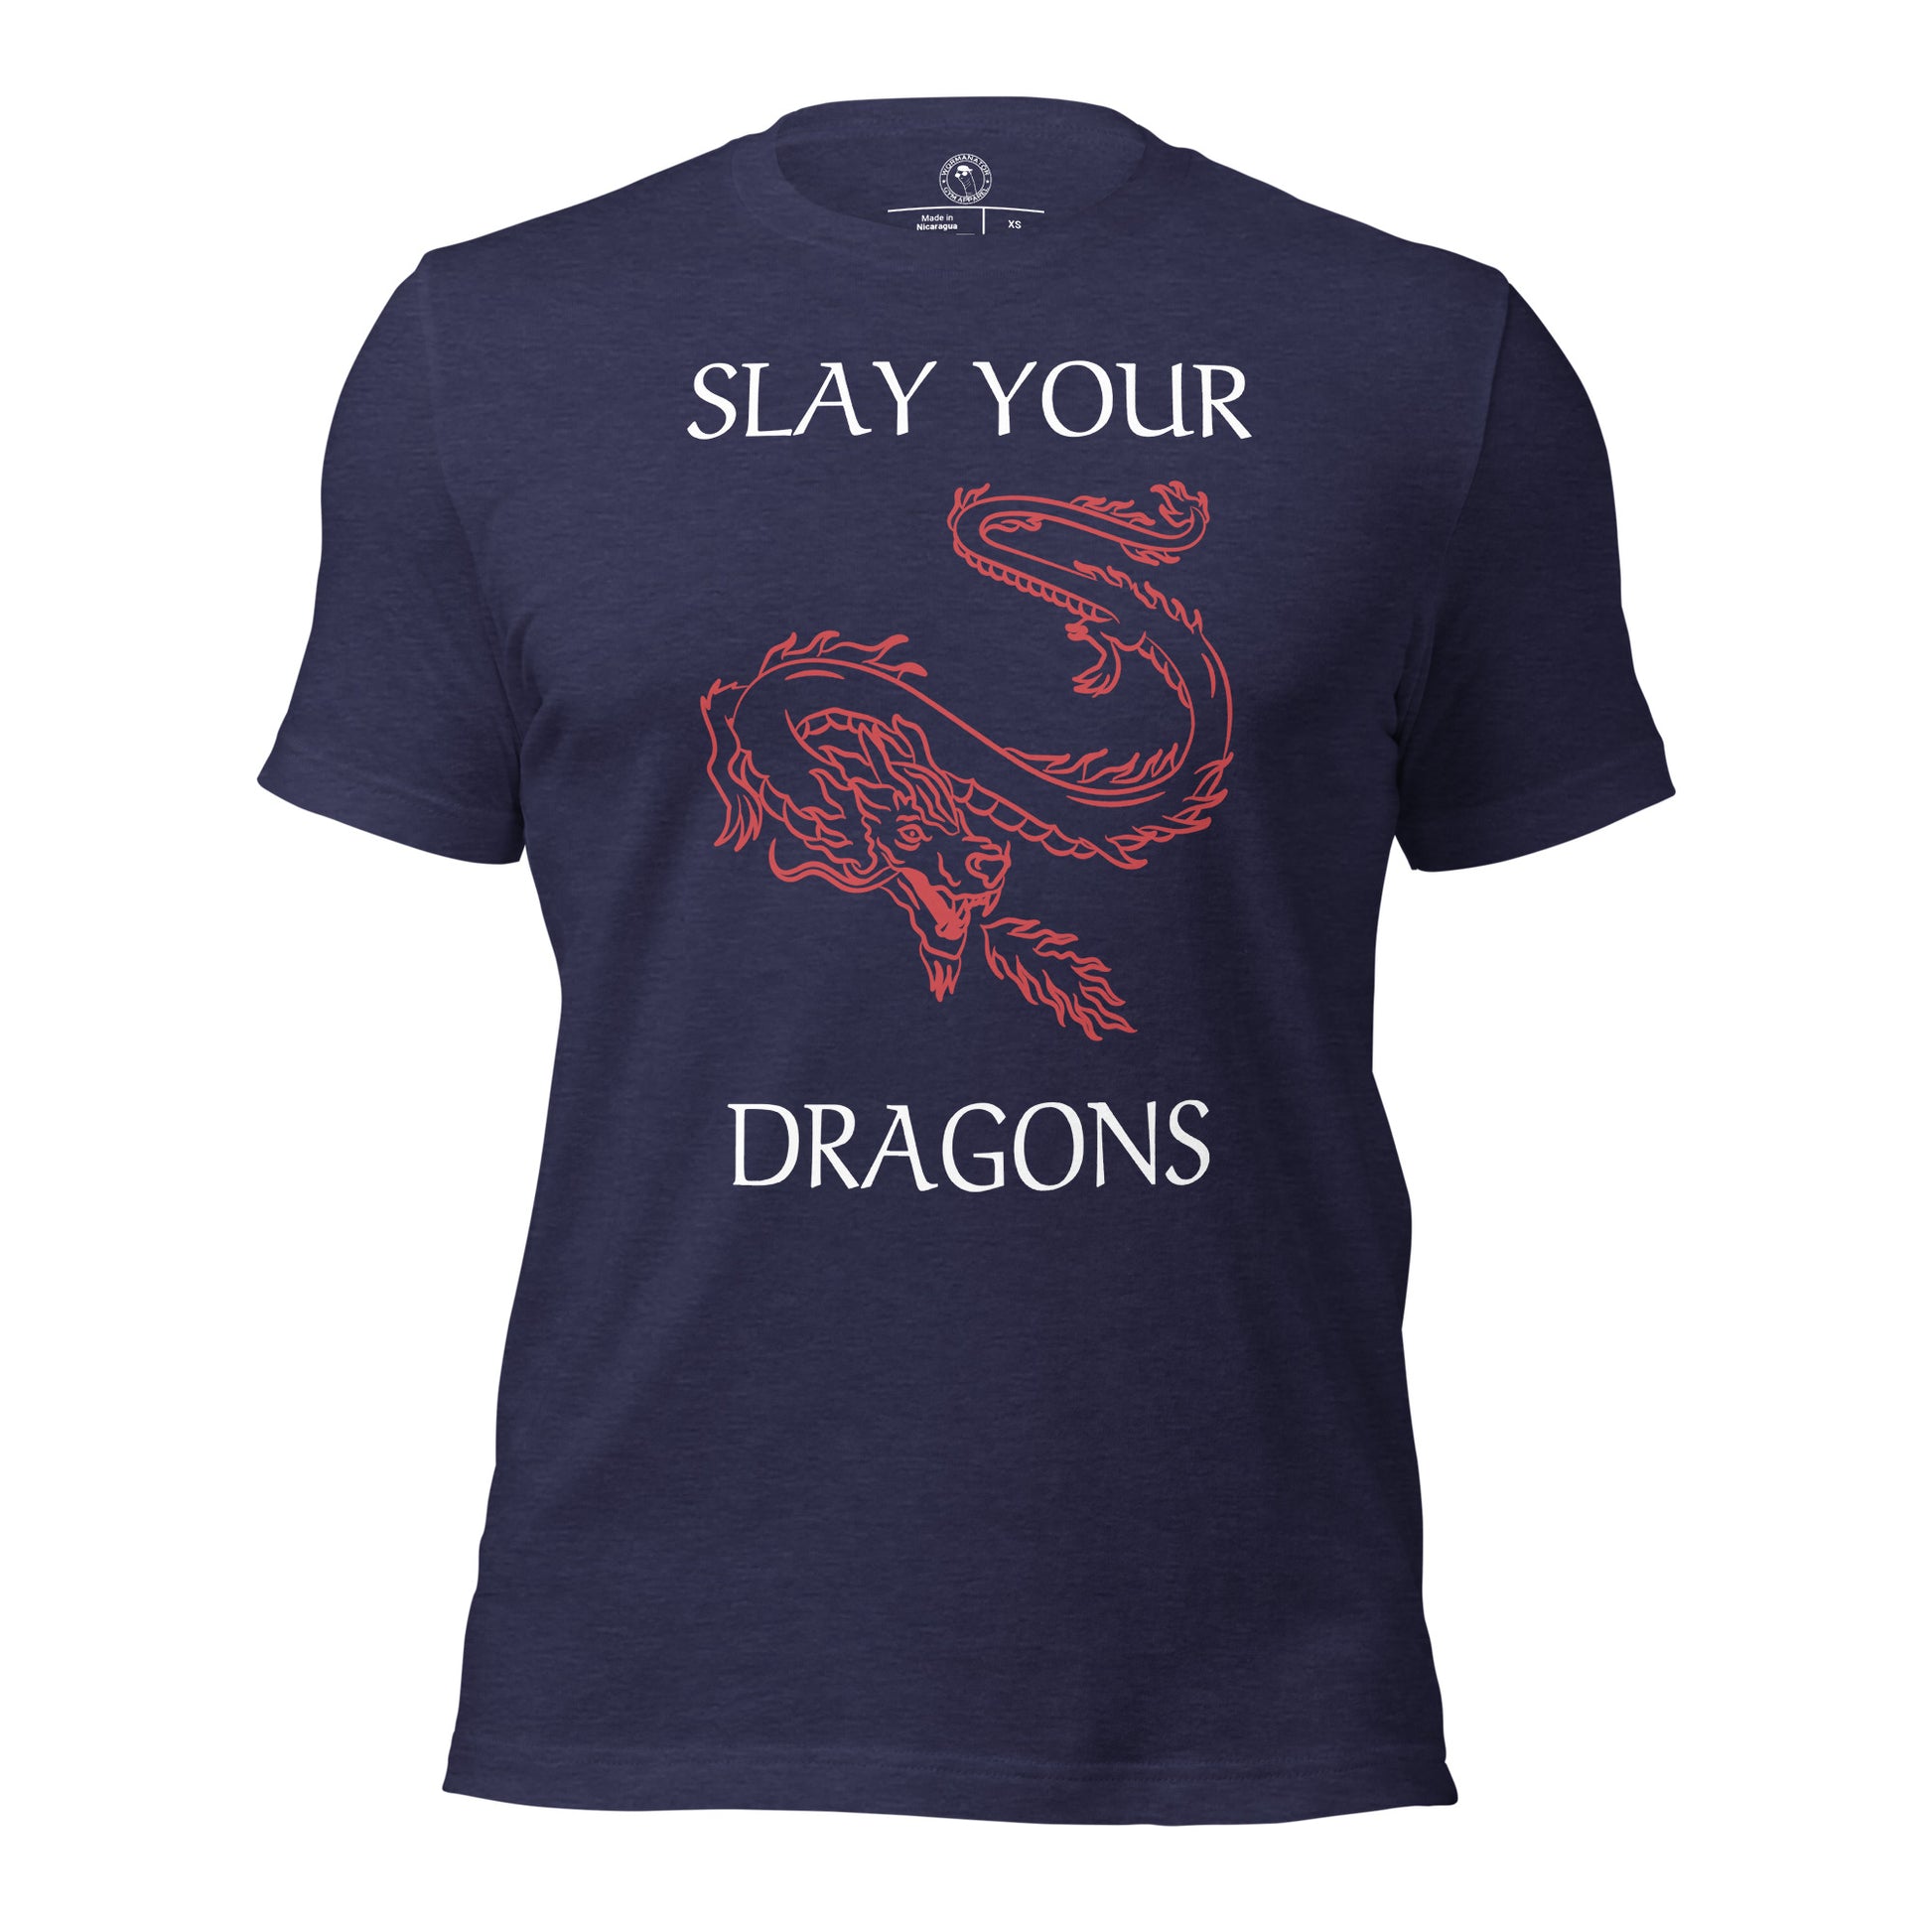 Slay Your Dragons Shirt in Heather Midnight Navy